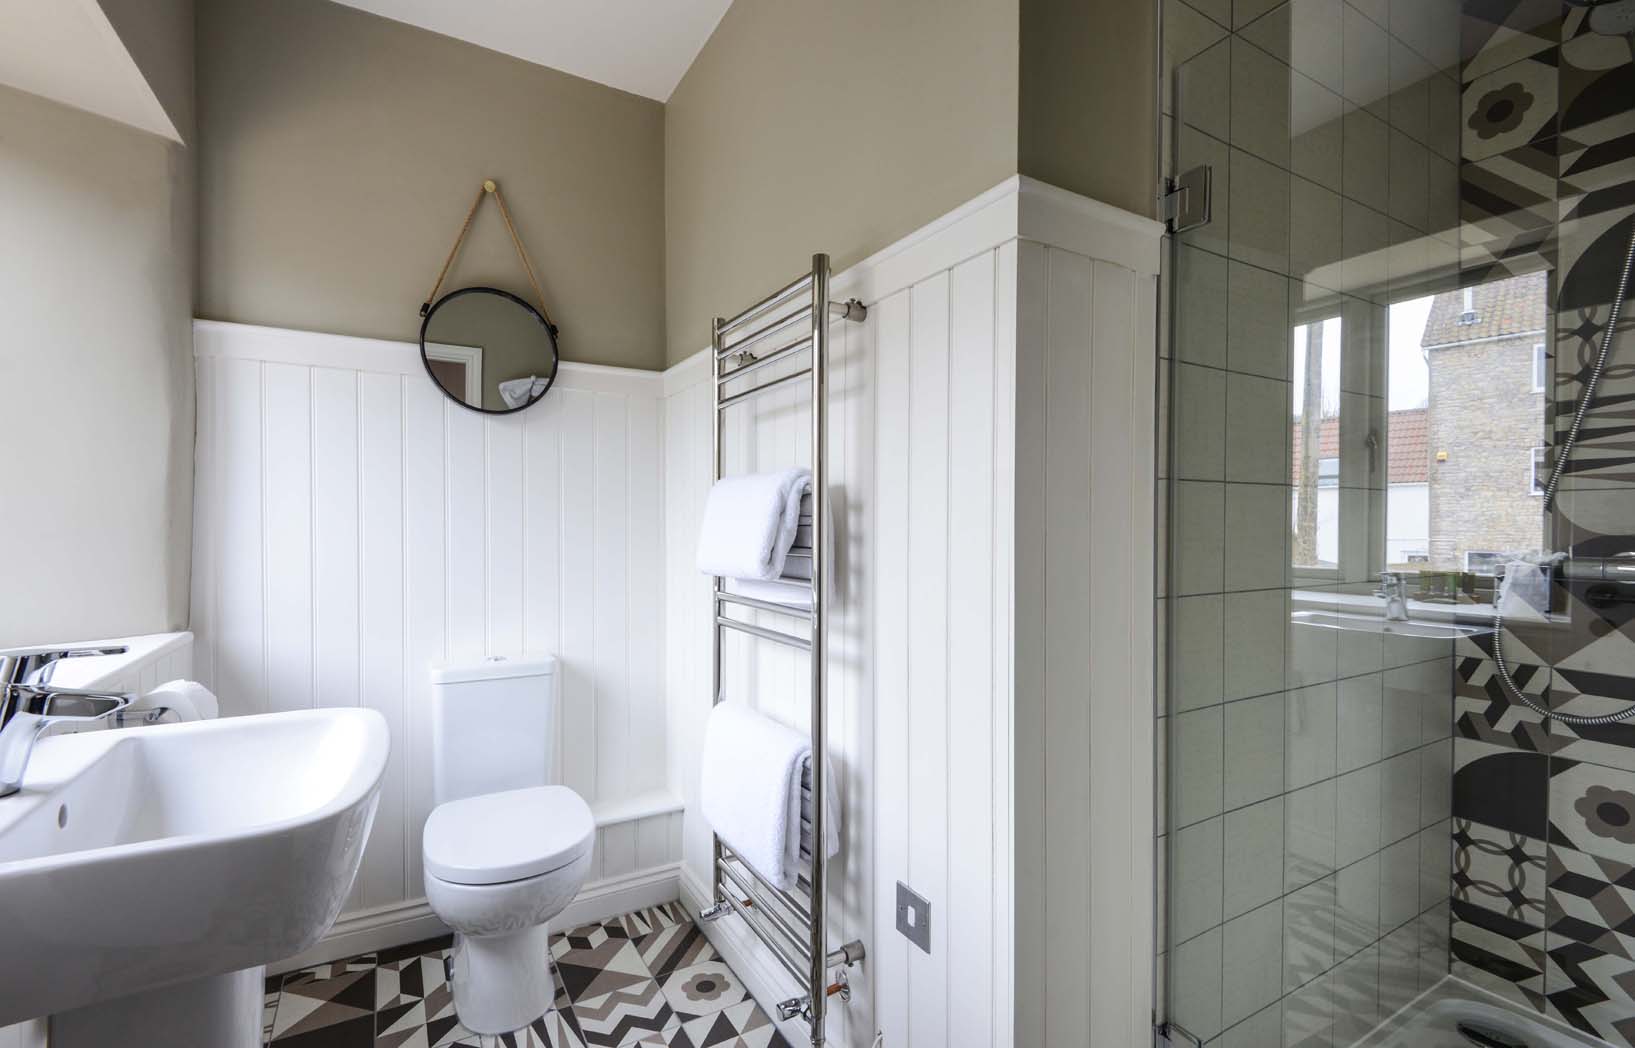 Butter Wells - Walk in shower with wooden panels, geometric tiled floor and heated towel rack